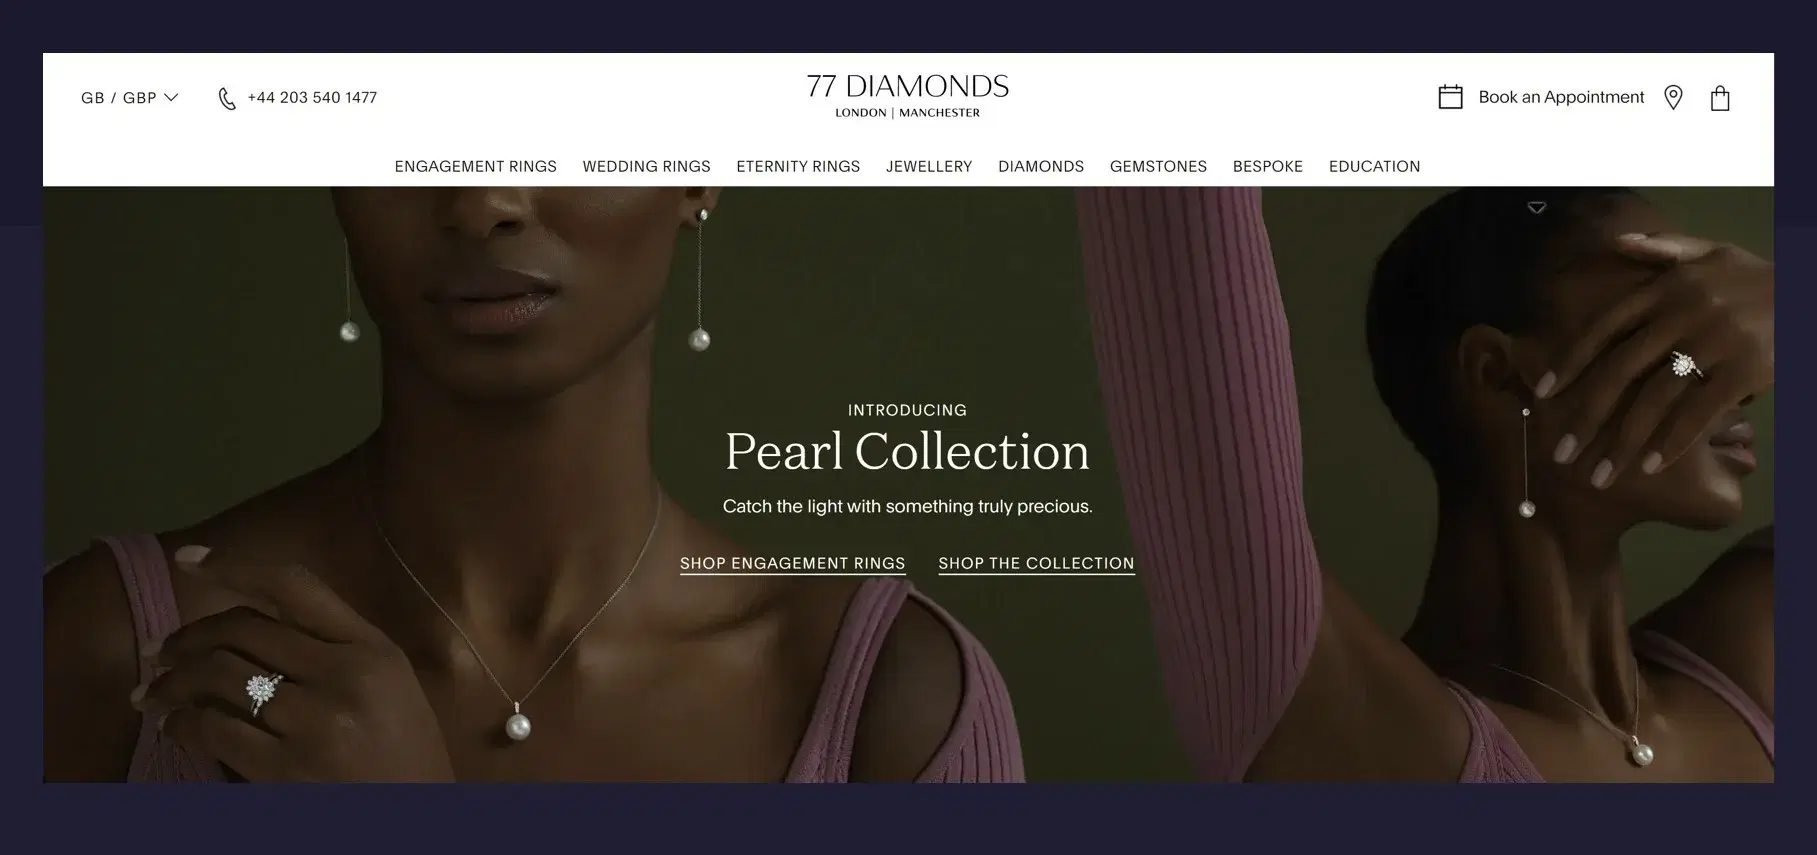 77 Diamonds Review (are they legit?)